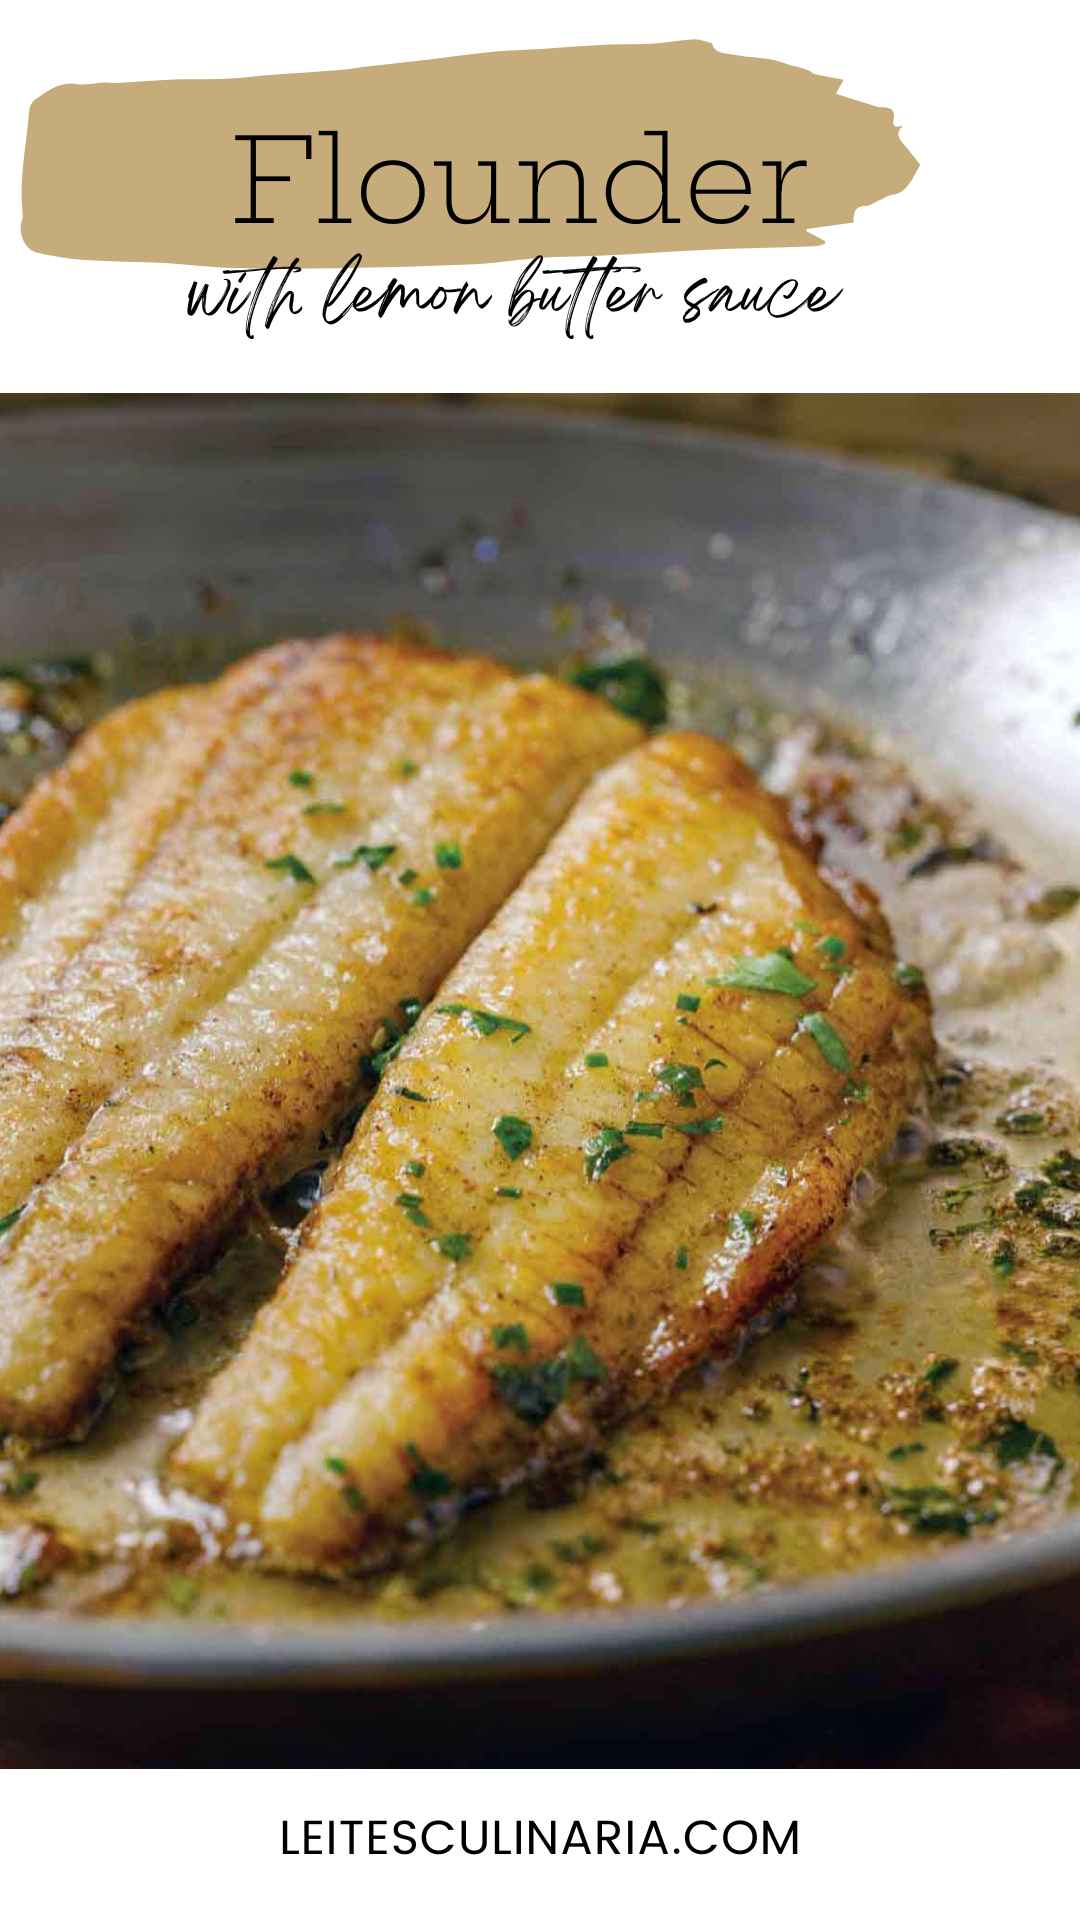 A pan-fried flounder fillet in a skillet with butter and parsley.